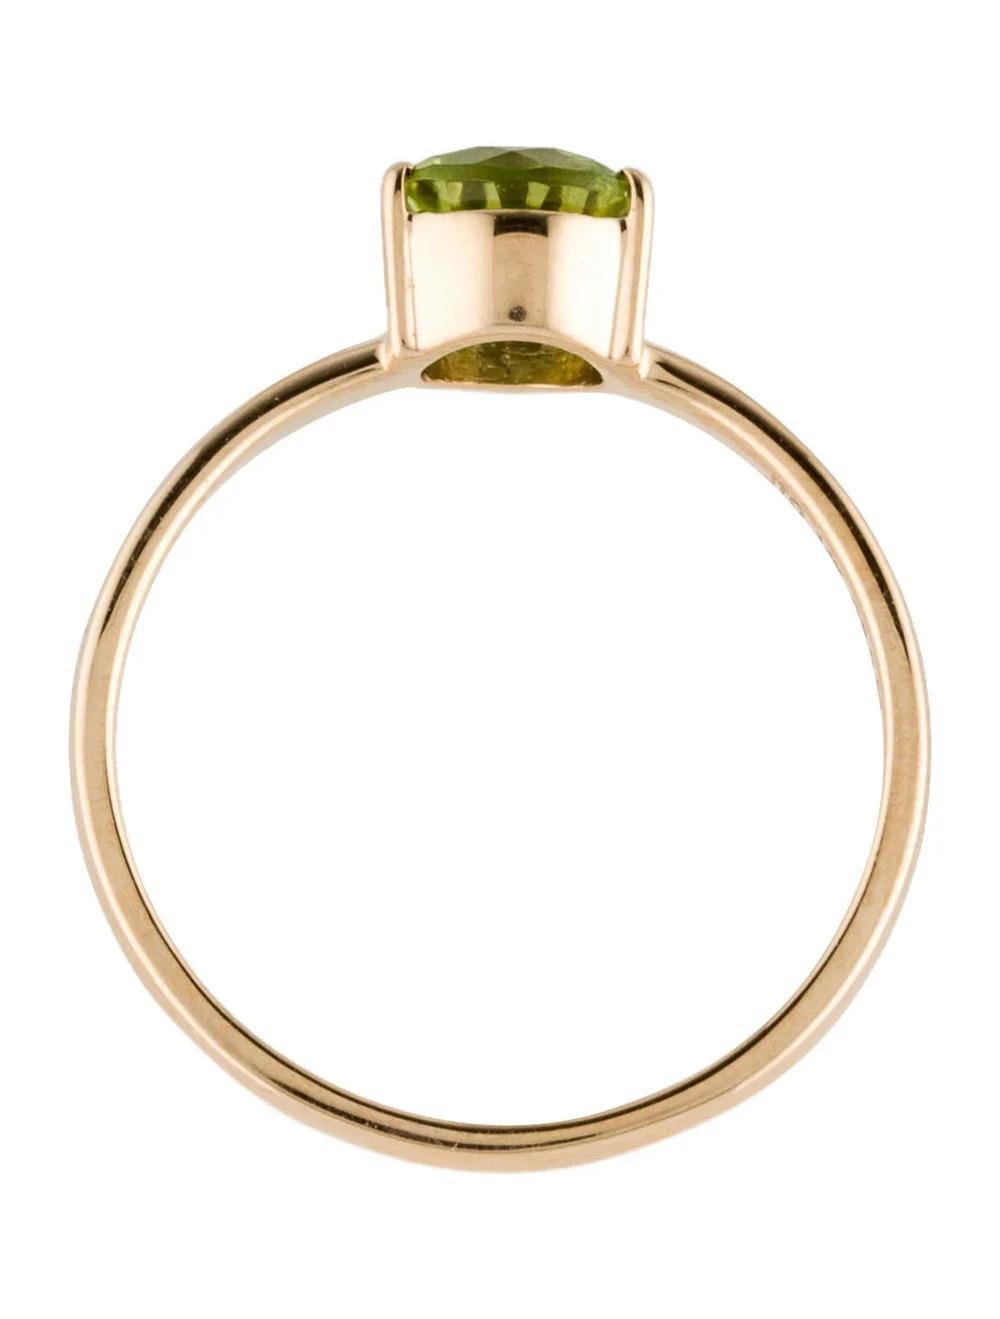 Women's Vintage 14K Peridot Solitaire Cocktail Ring, Size 7 - Green Gemstone Jewelry For Sale